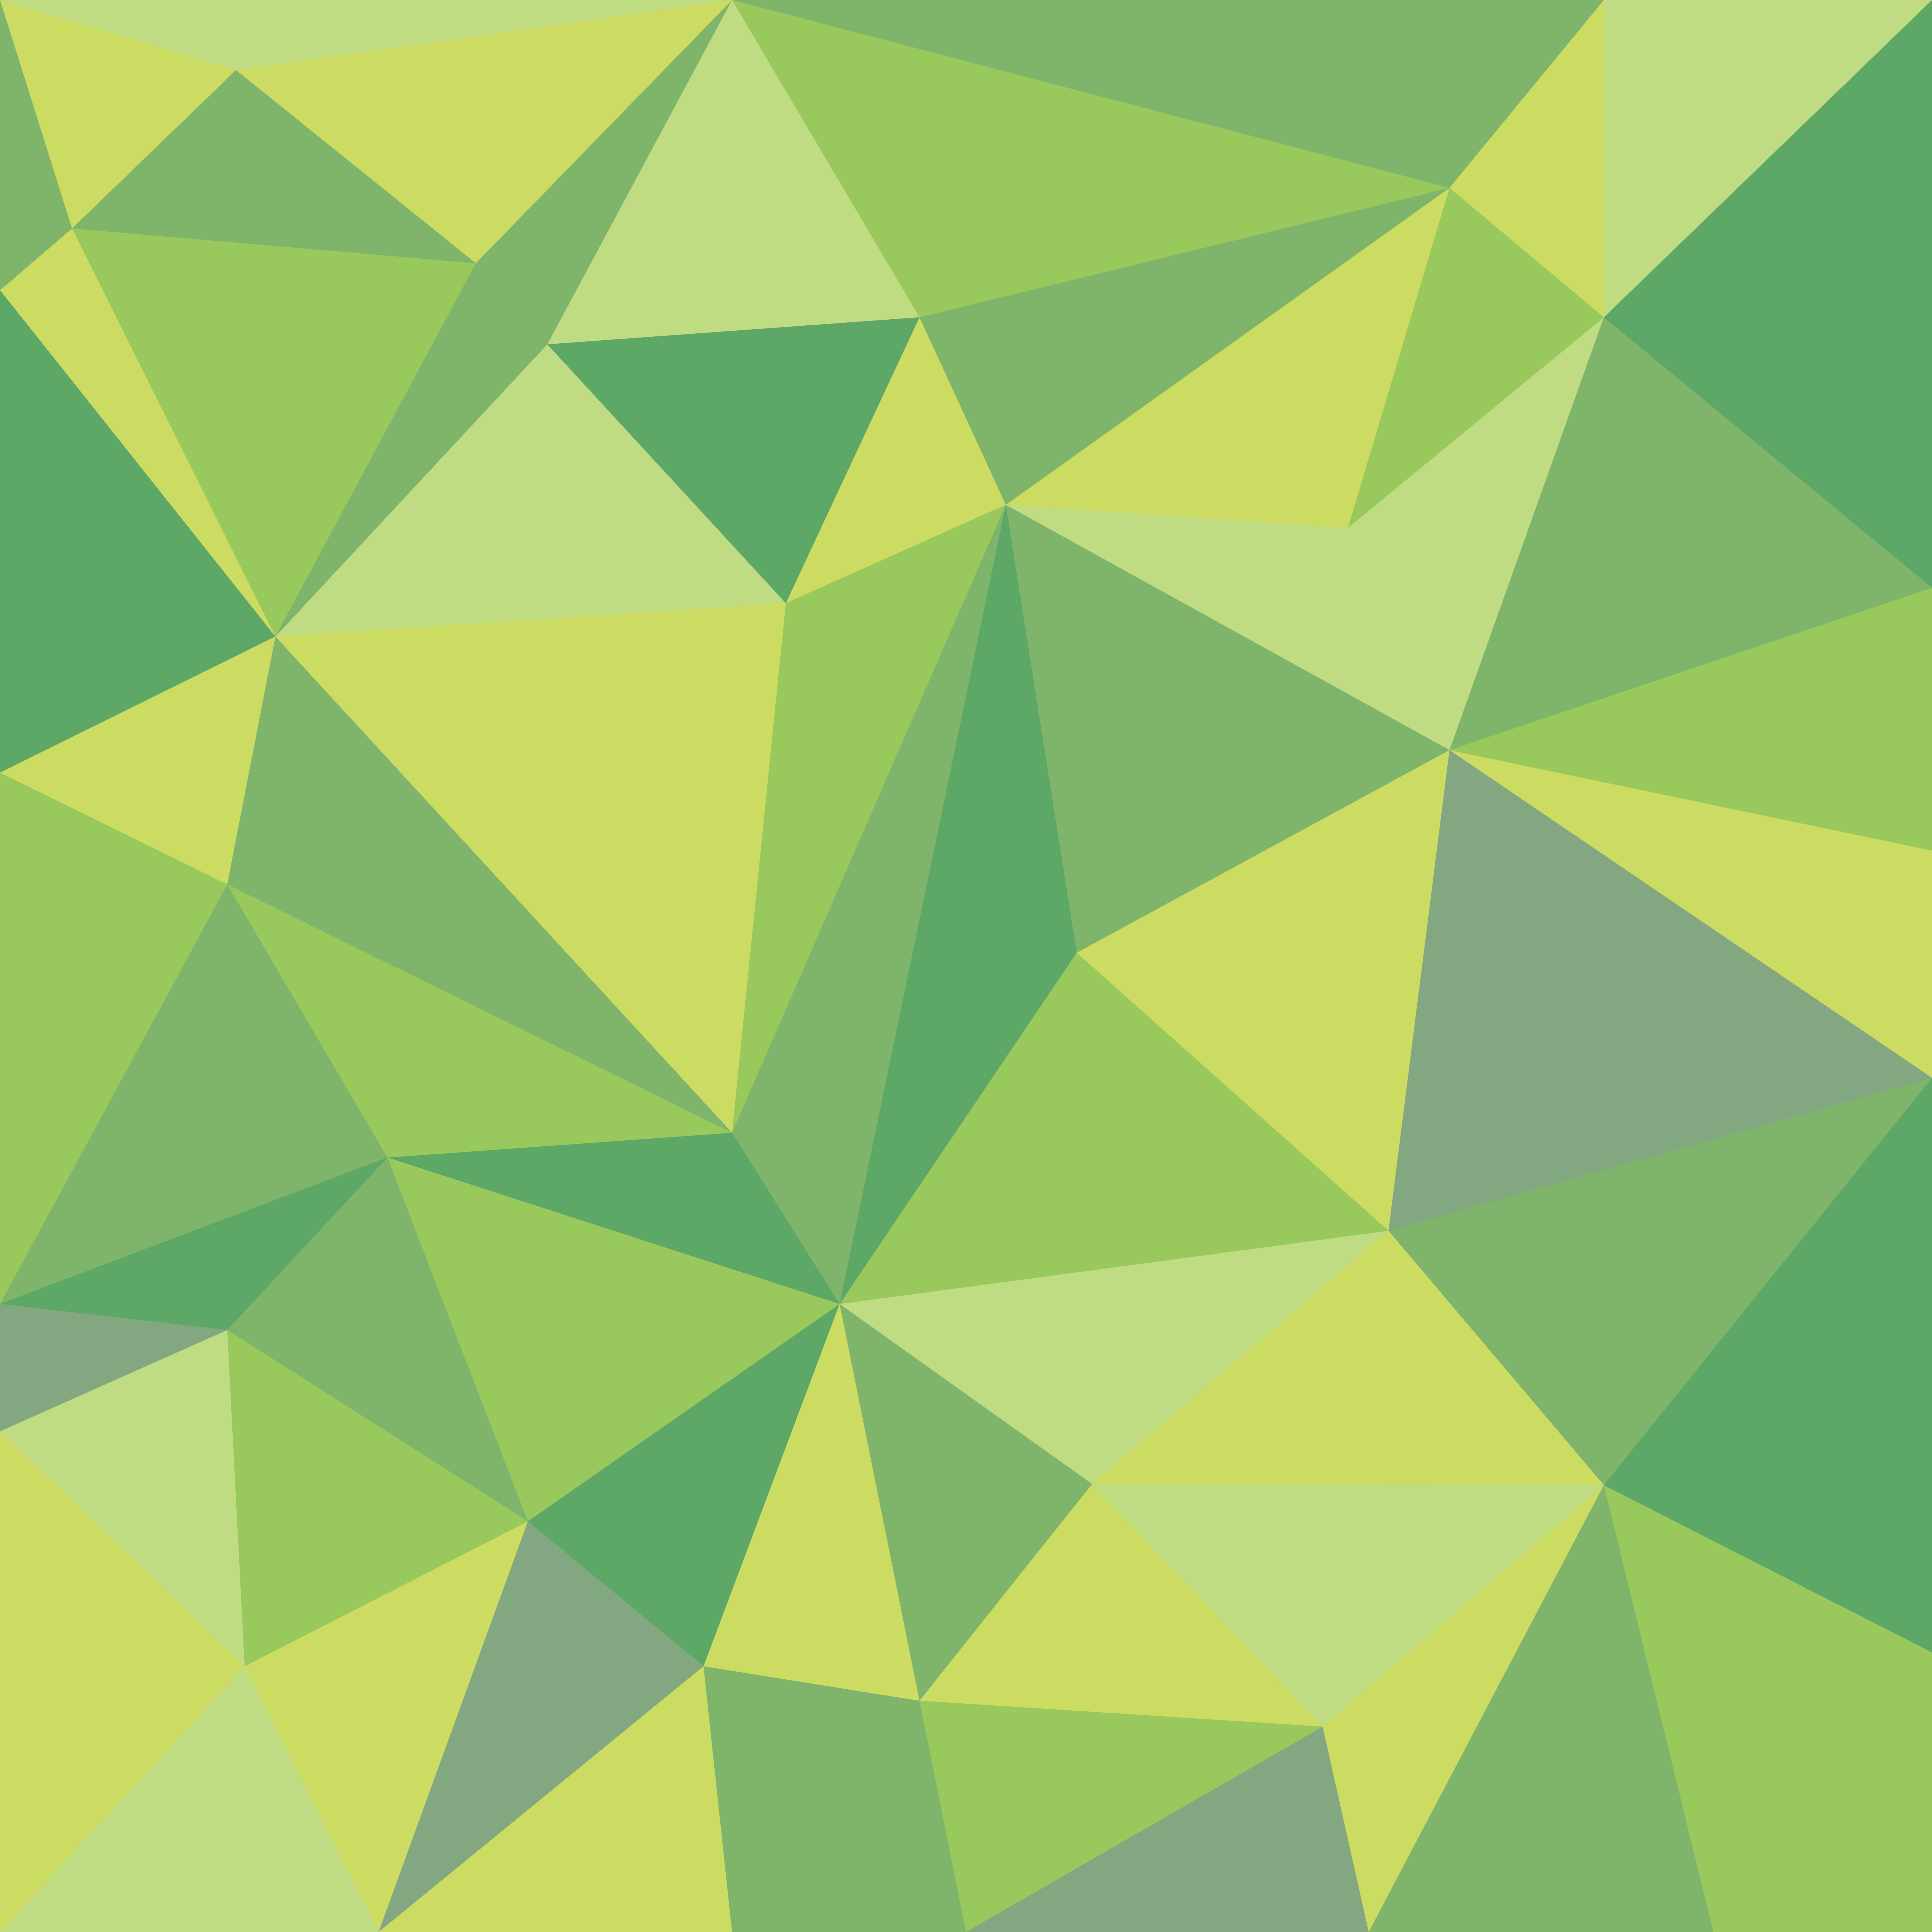 Green with Yellow Triangle Logo - Wallpaper : illustration, abstract, symmetry, green, yellow ...